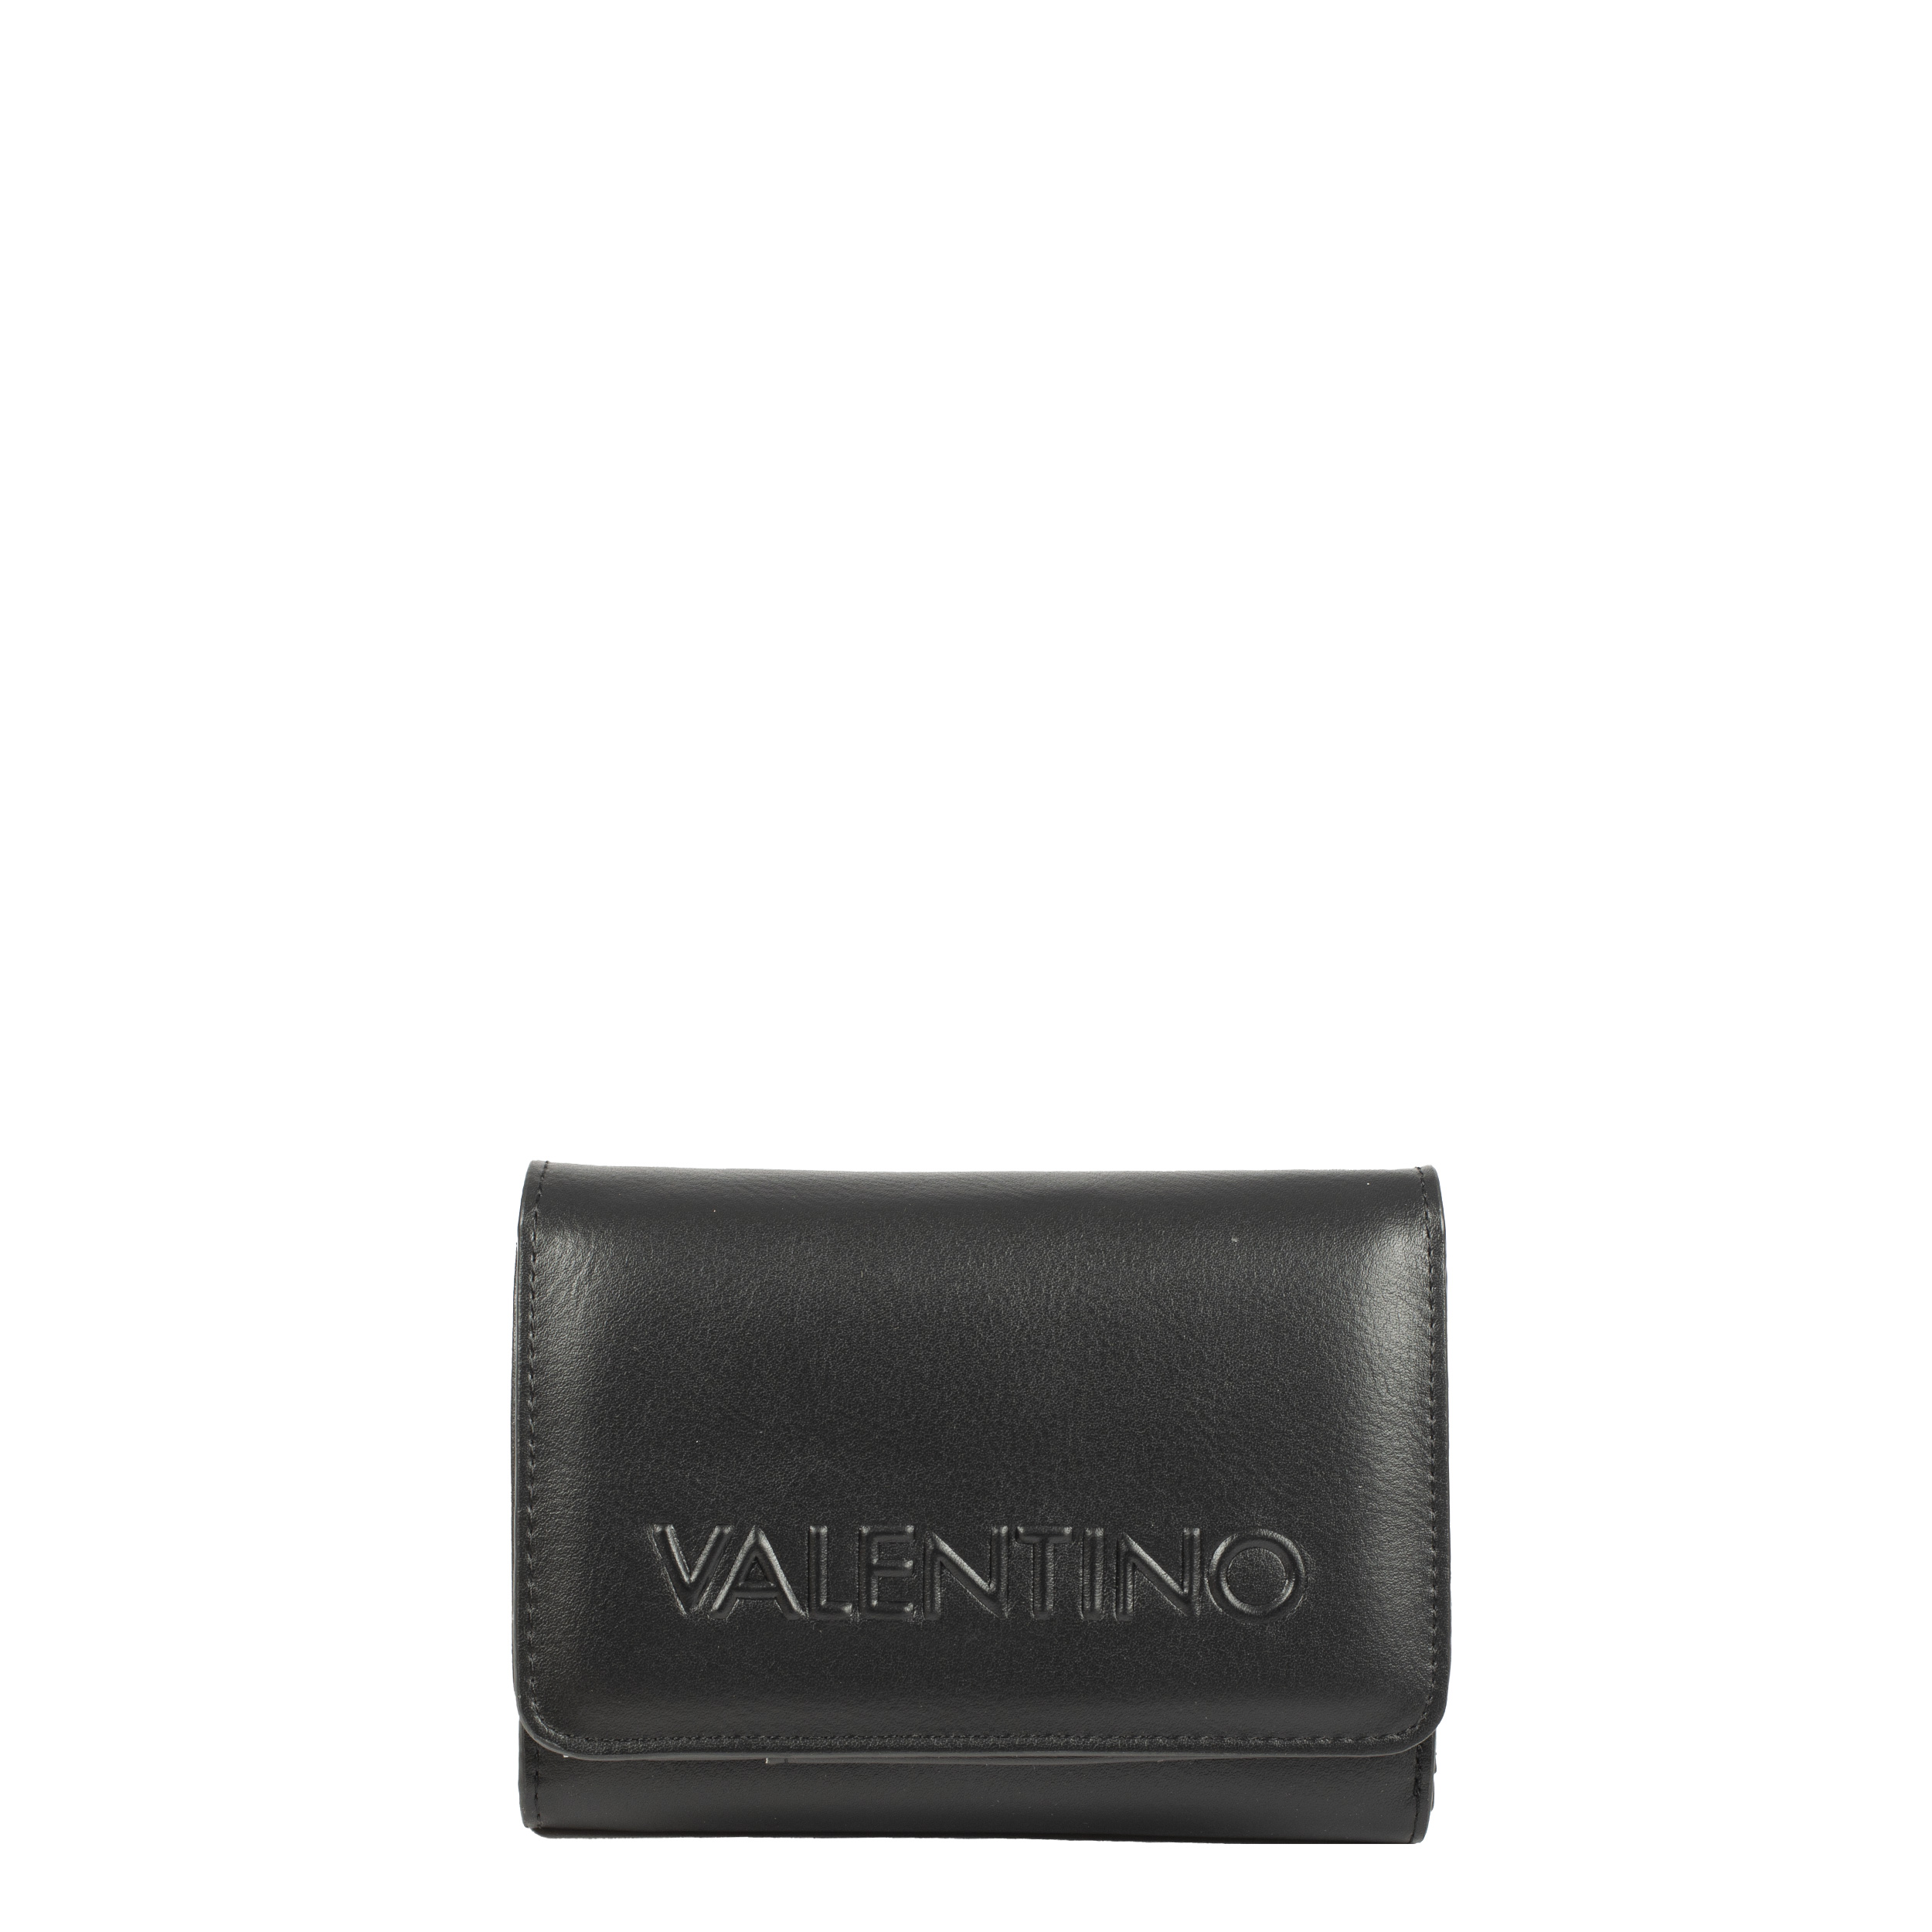 Portefeuille Valentino Holiday Re noir face